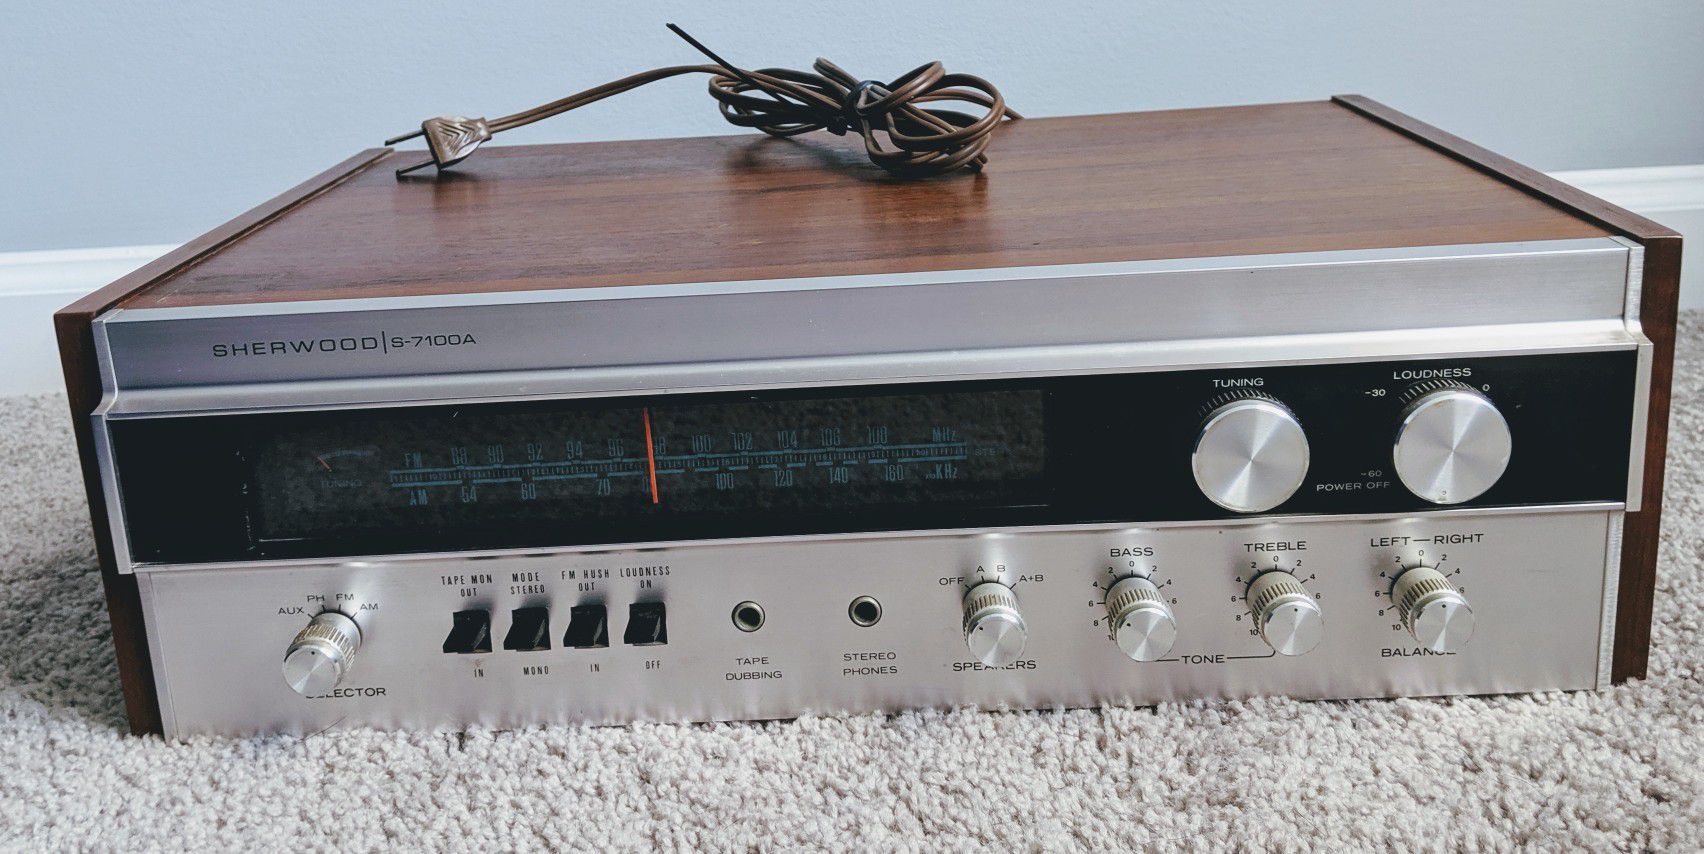 Sherwood S-7100A Vintage AM FM Stereo Reciever From 1971